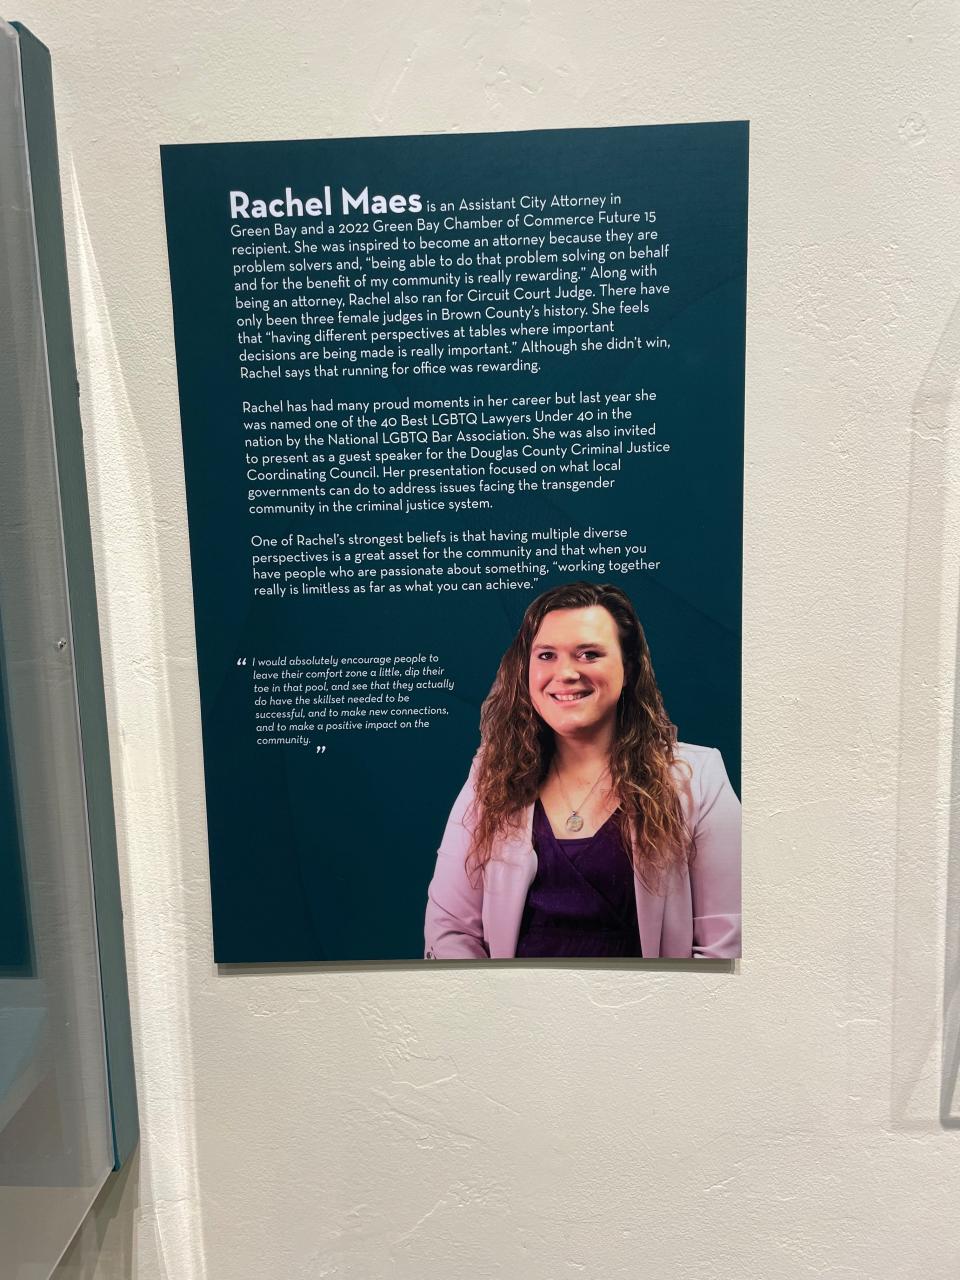 A placard of Rachel Maes hangs in the HerStory exhibit at the Neville Museum in Green Bay. Maes is an openly trans woman who works as an attorney in Green Bay.